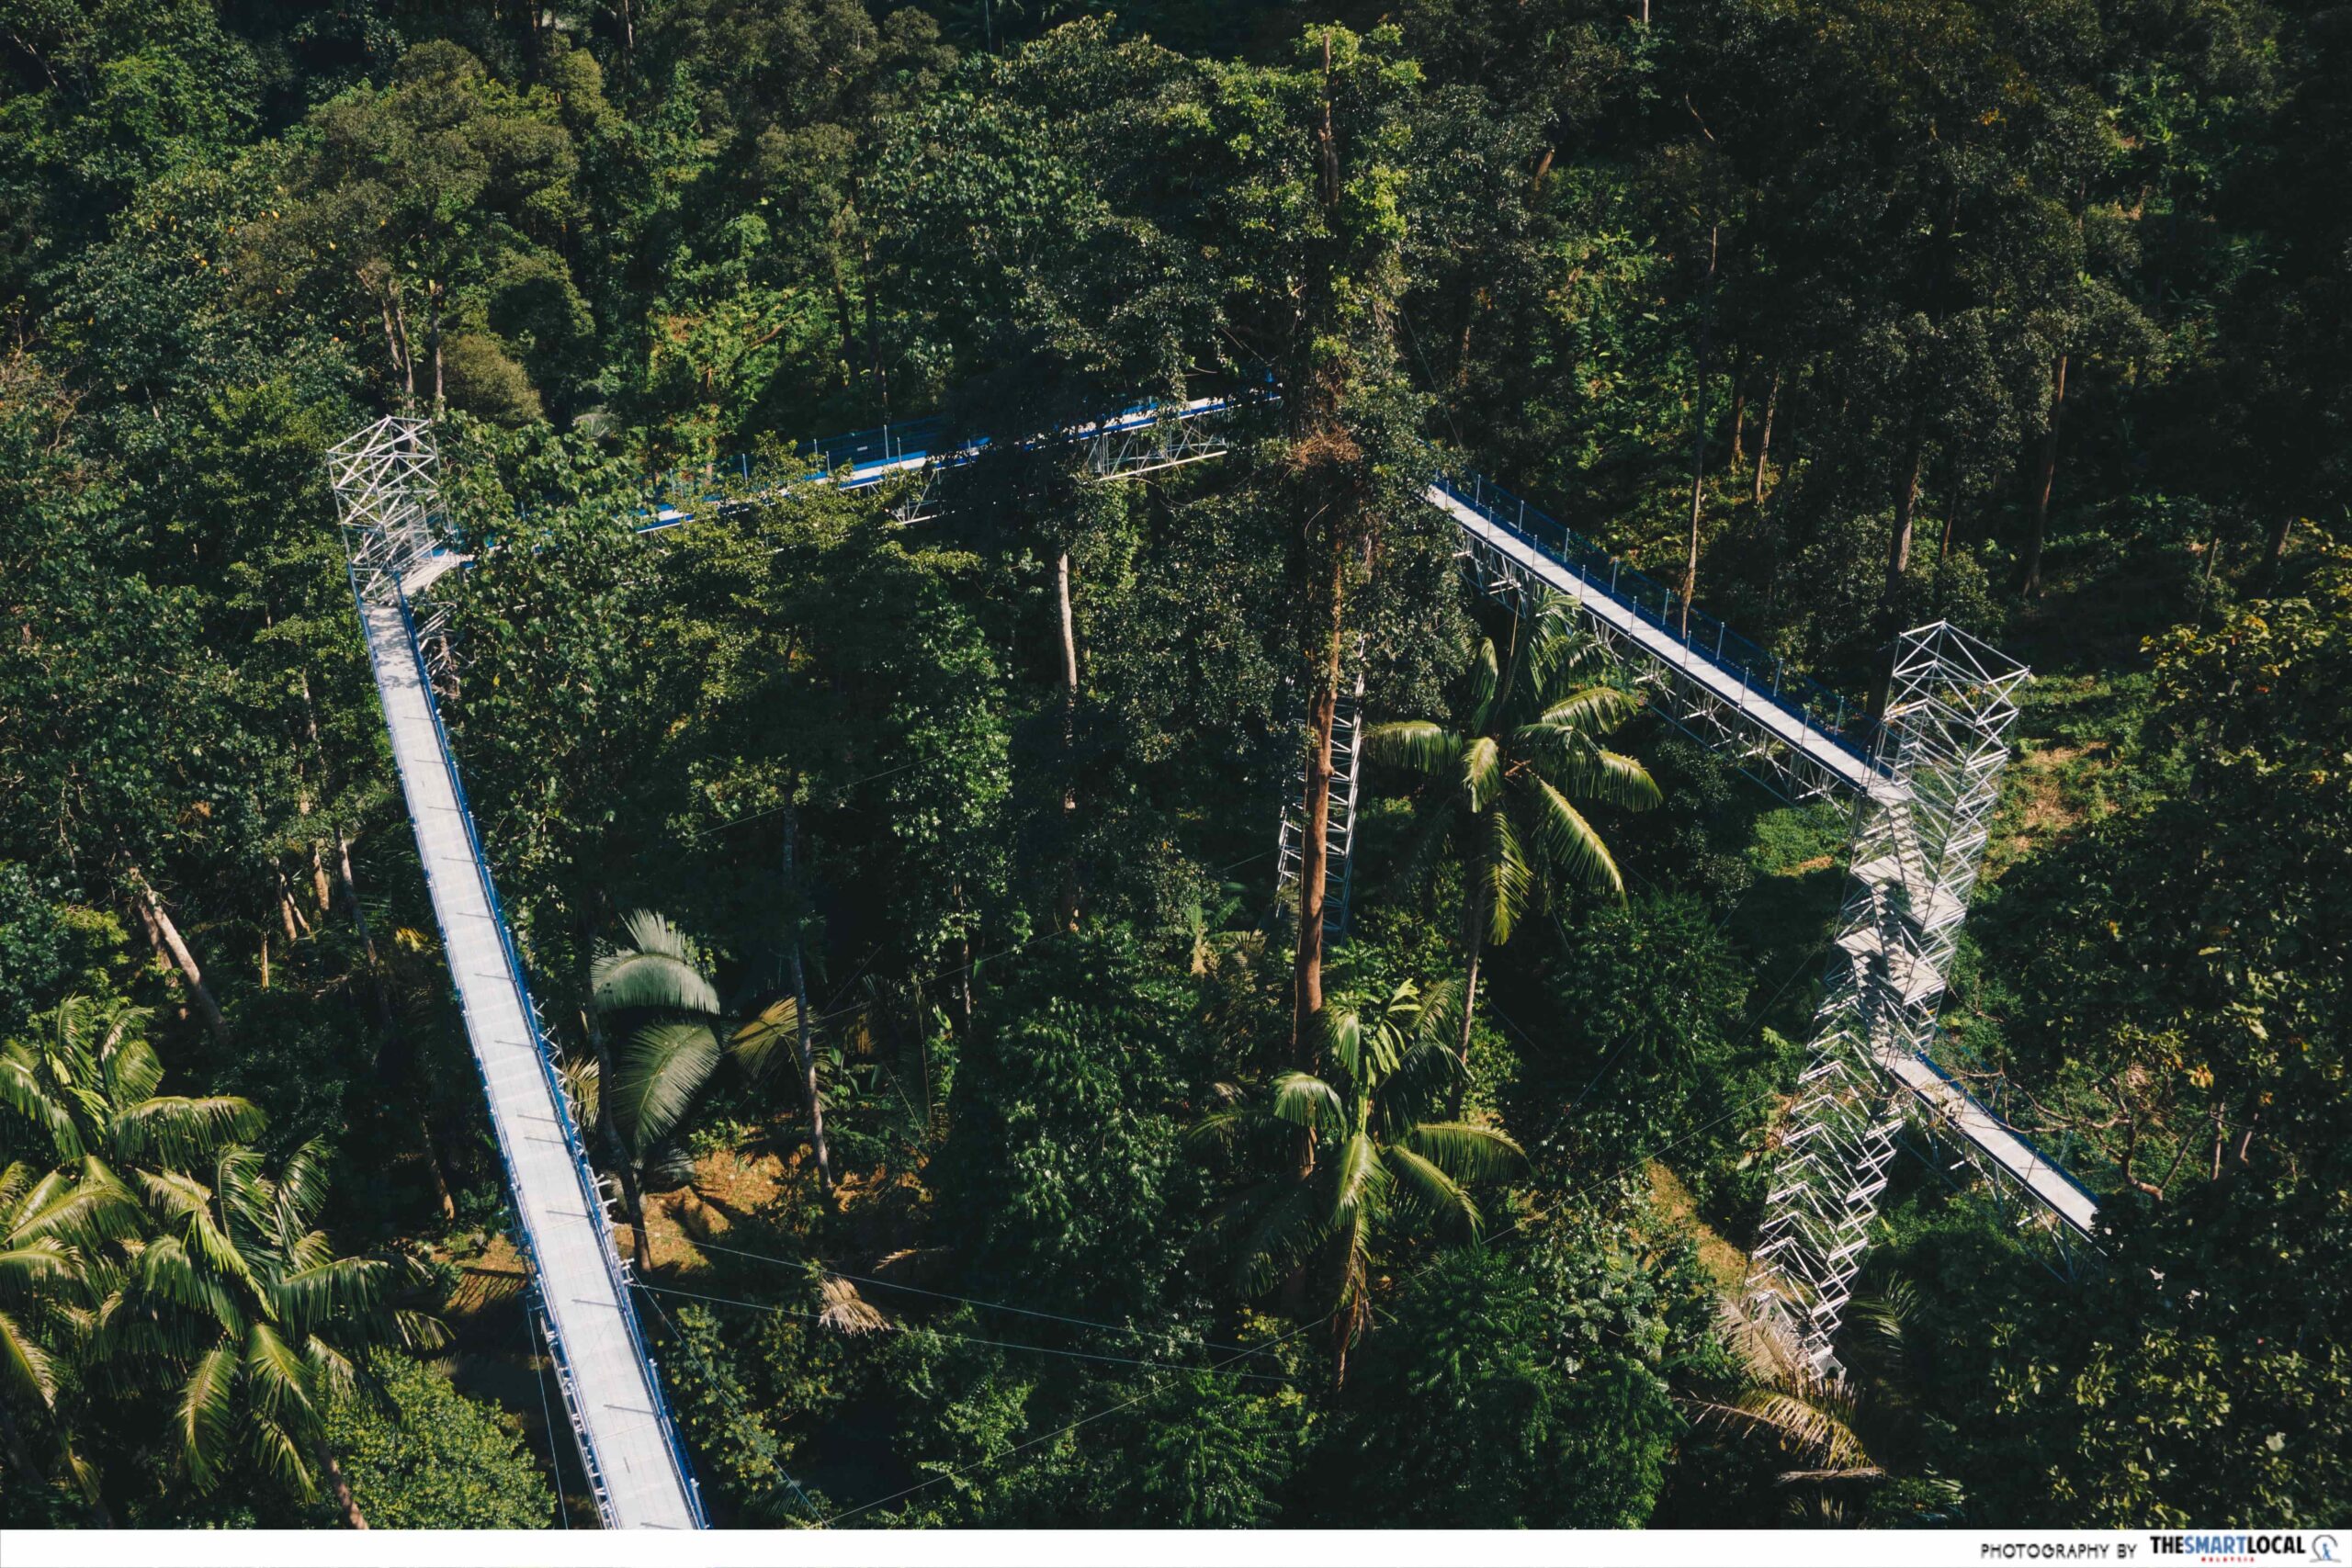 FOREST SKYWALK - panoramic view